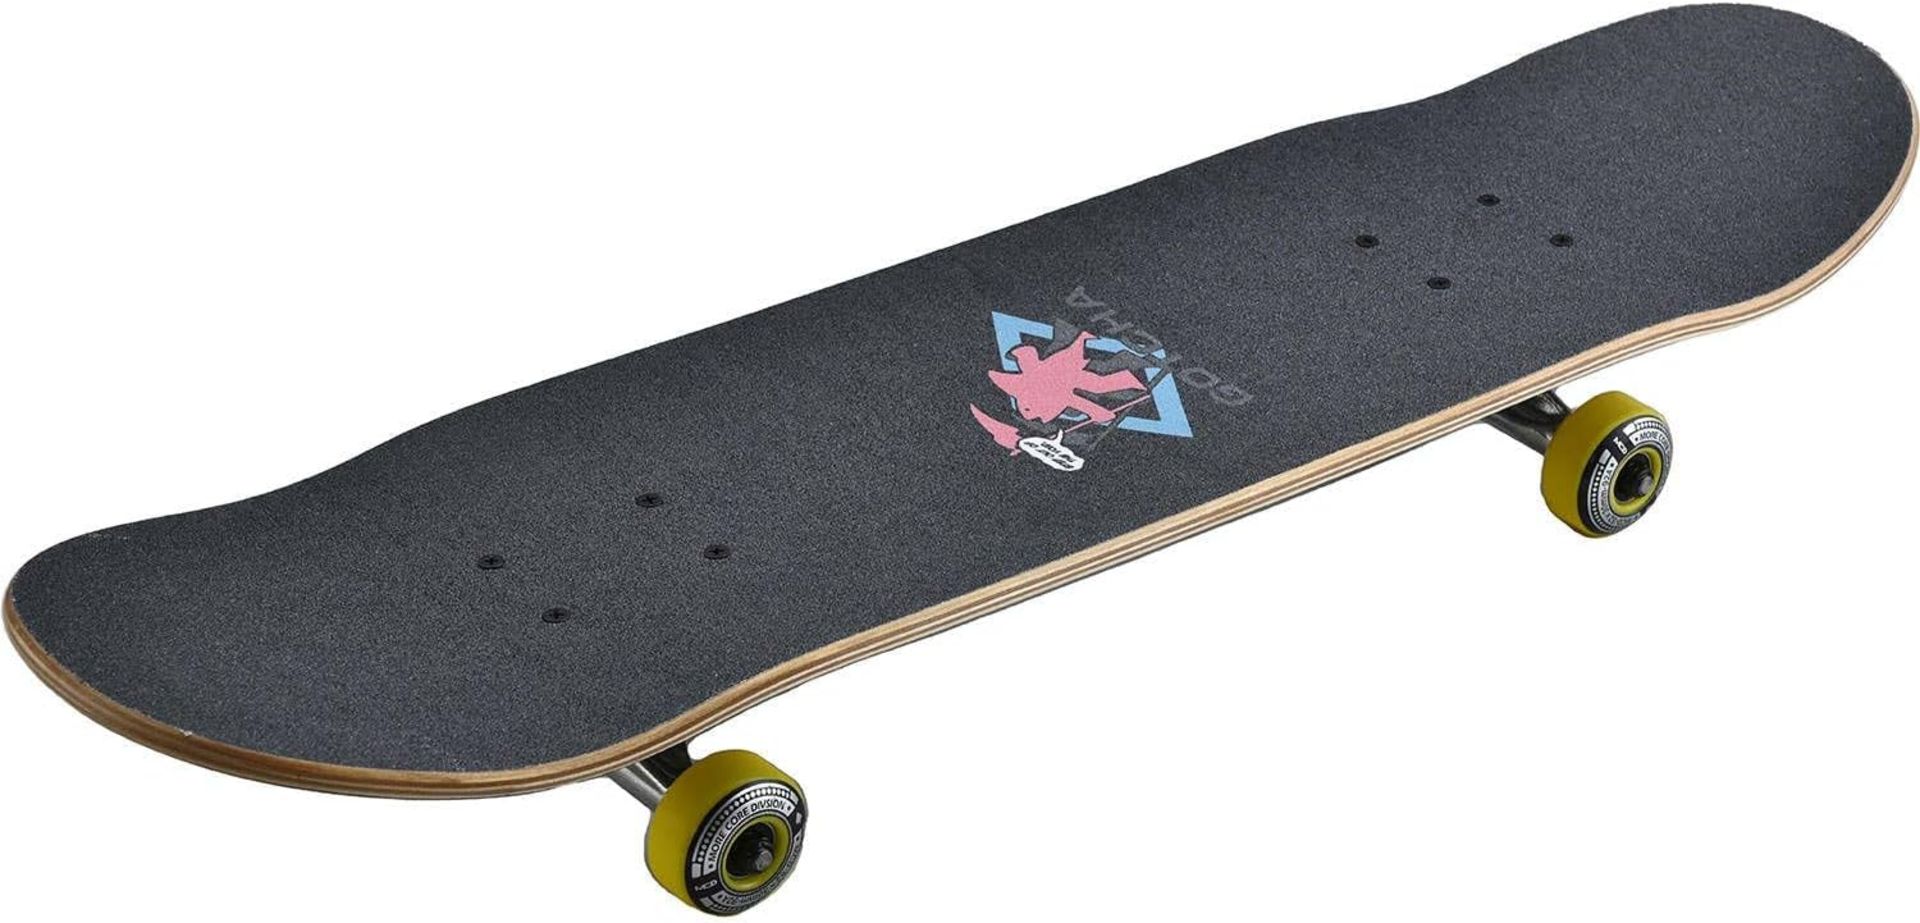 20 UNITS X NEW GOTCHA POPSICLE COMPLETE SKATEBOARD - DAISY AGE 8 _____**RRP £1700** - Image 2 of 3